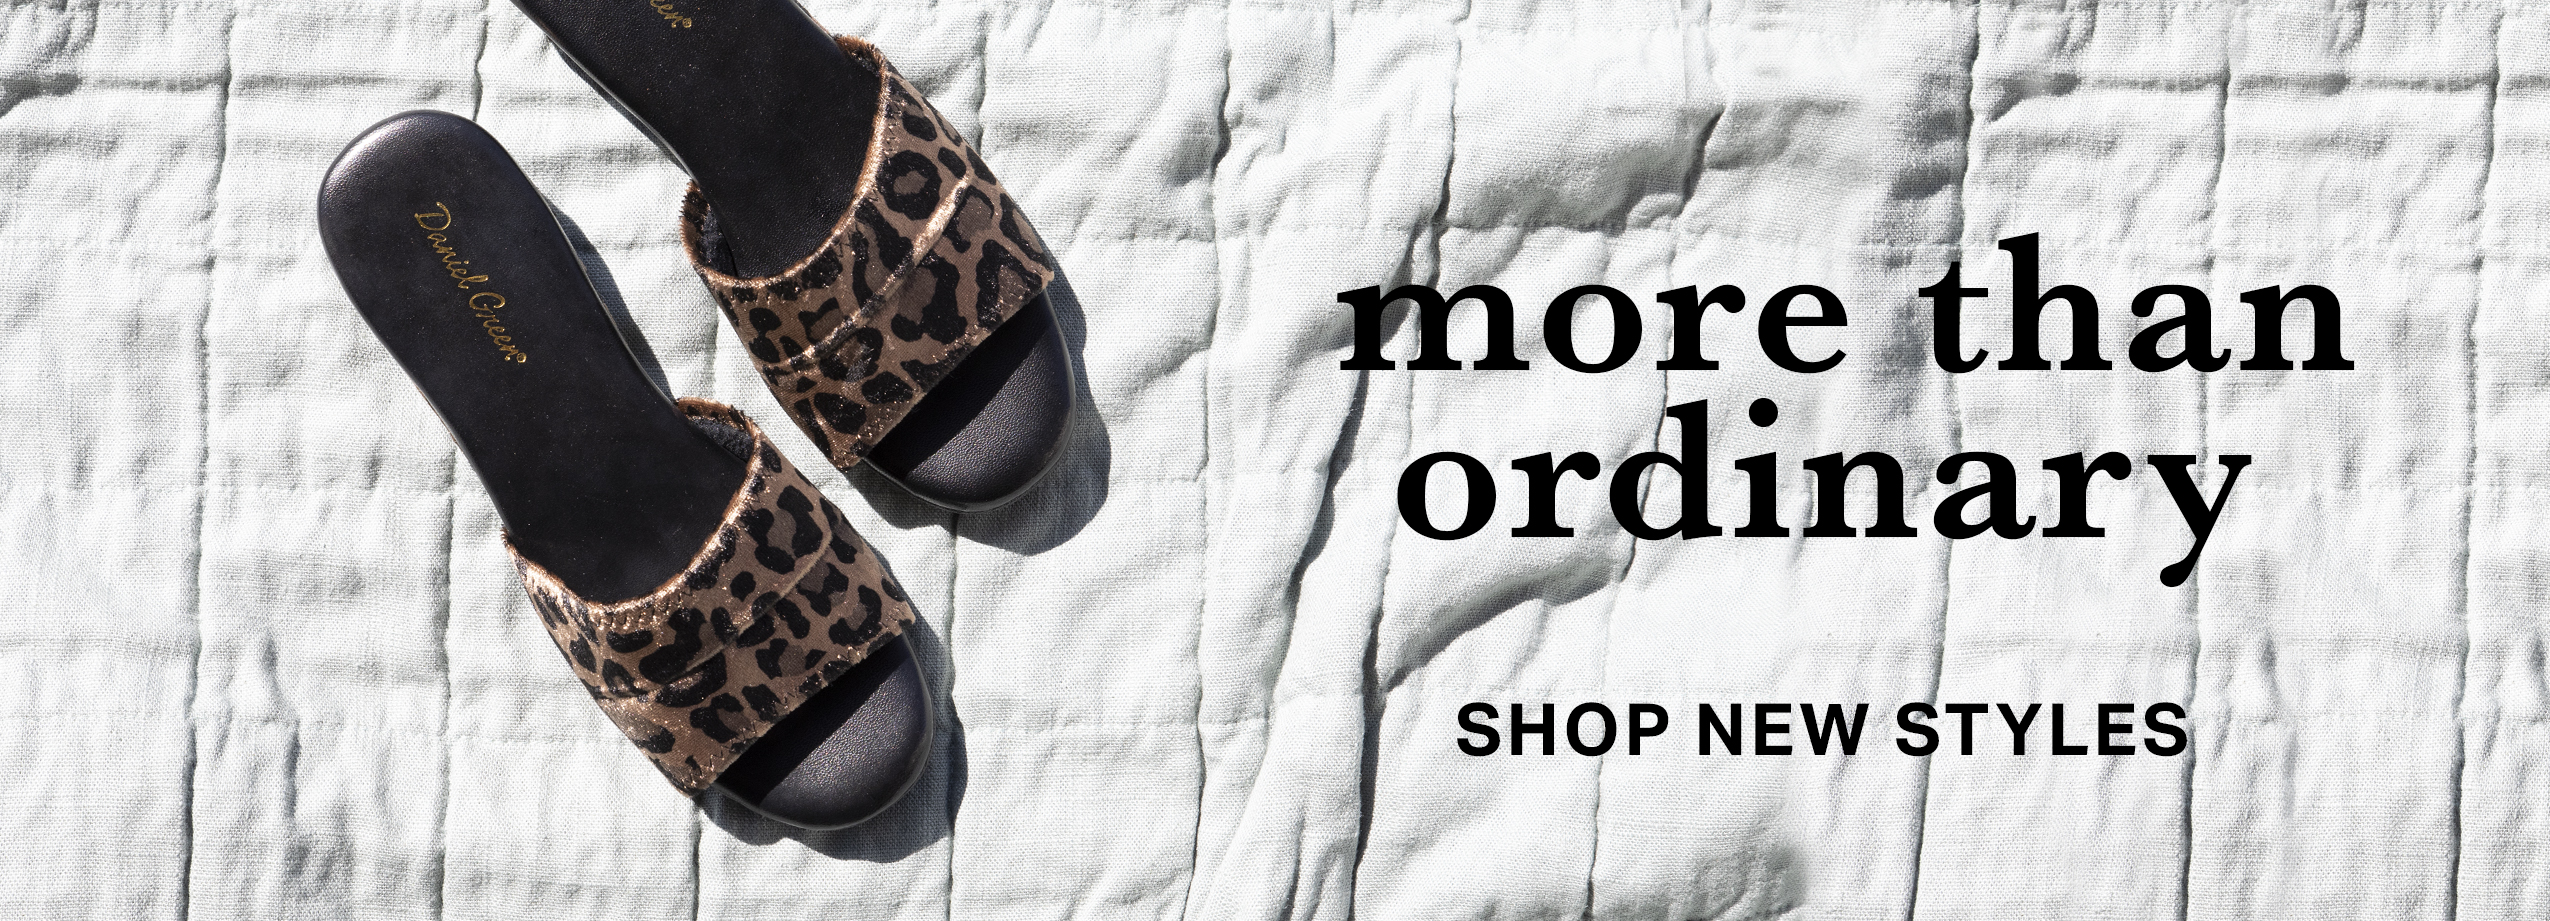 New Dormie in leopard print. More than ordinary, shop new styles.